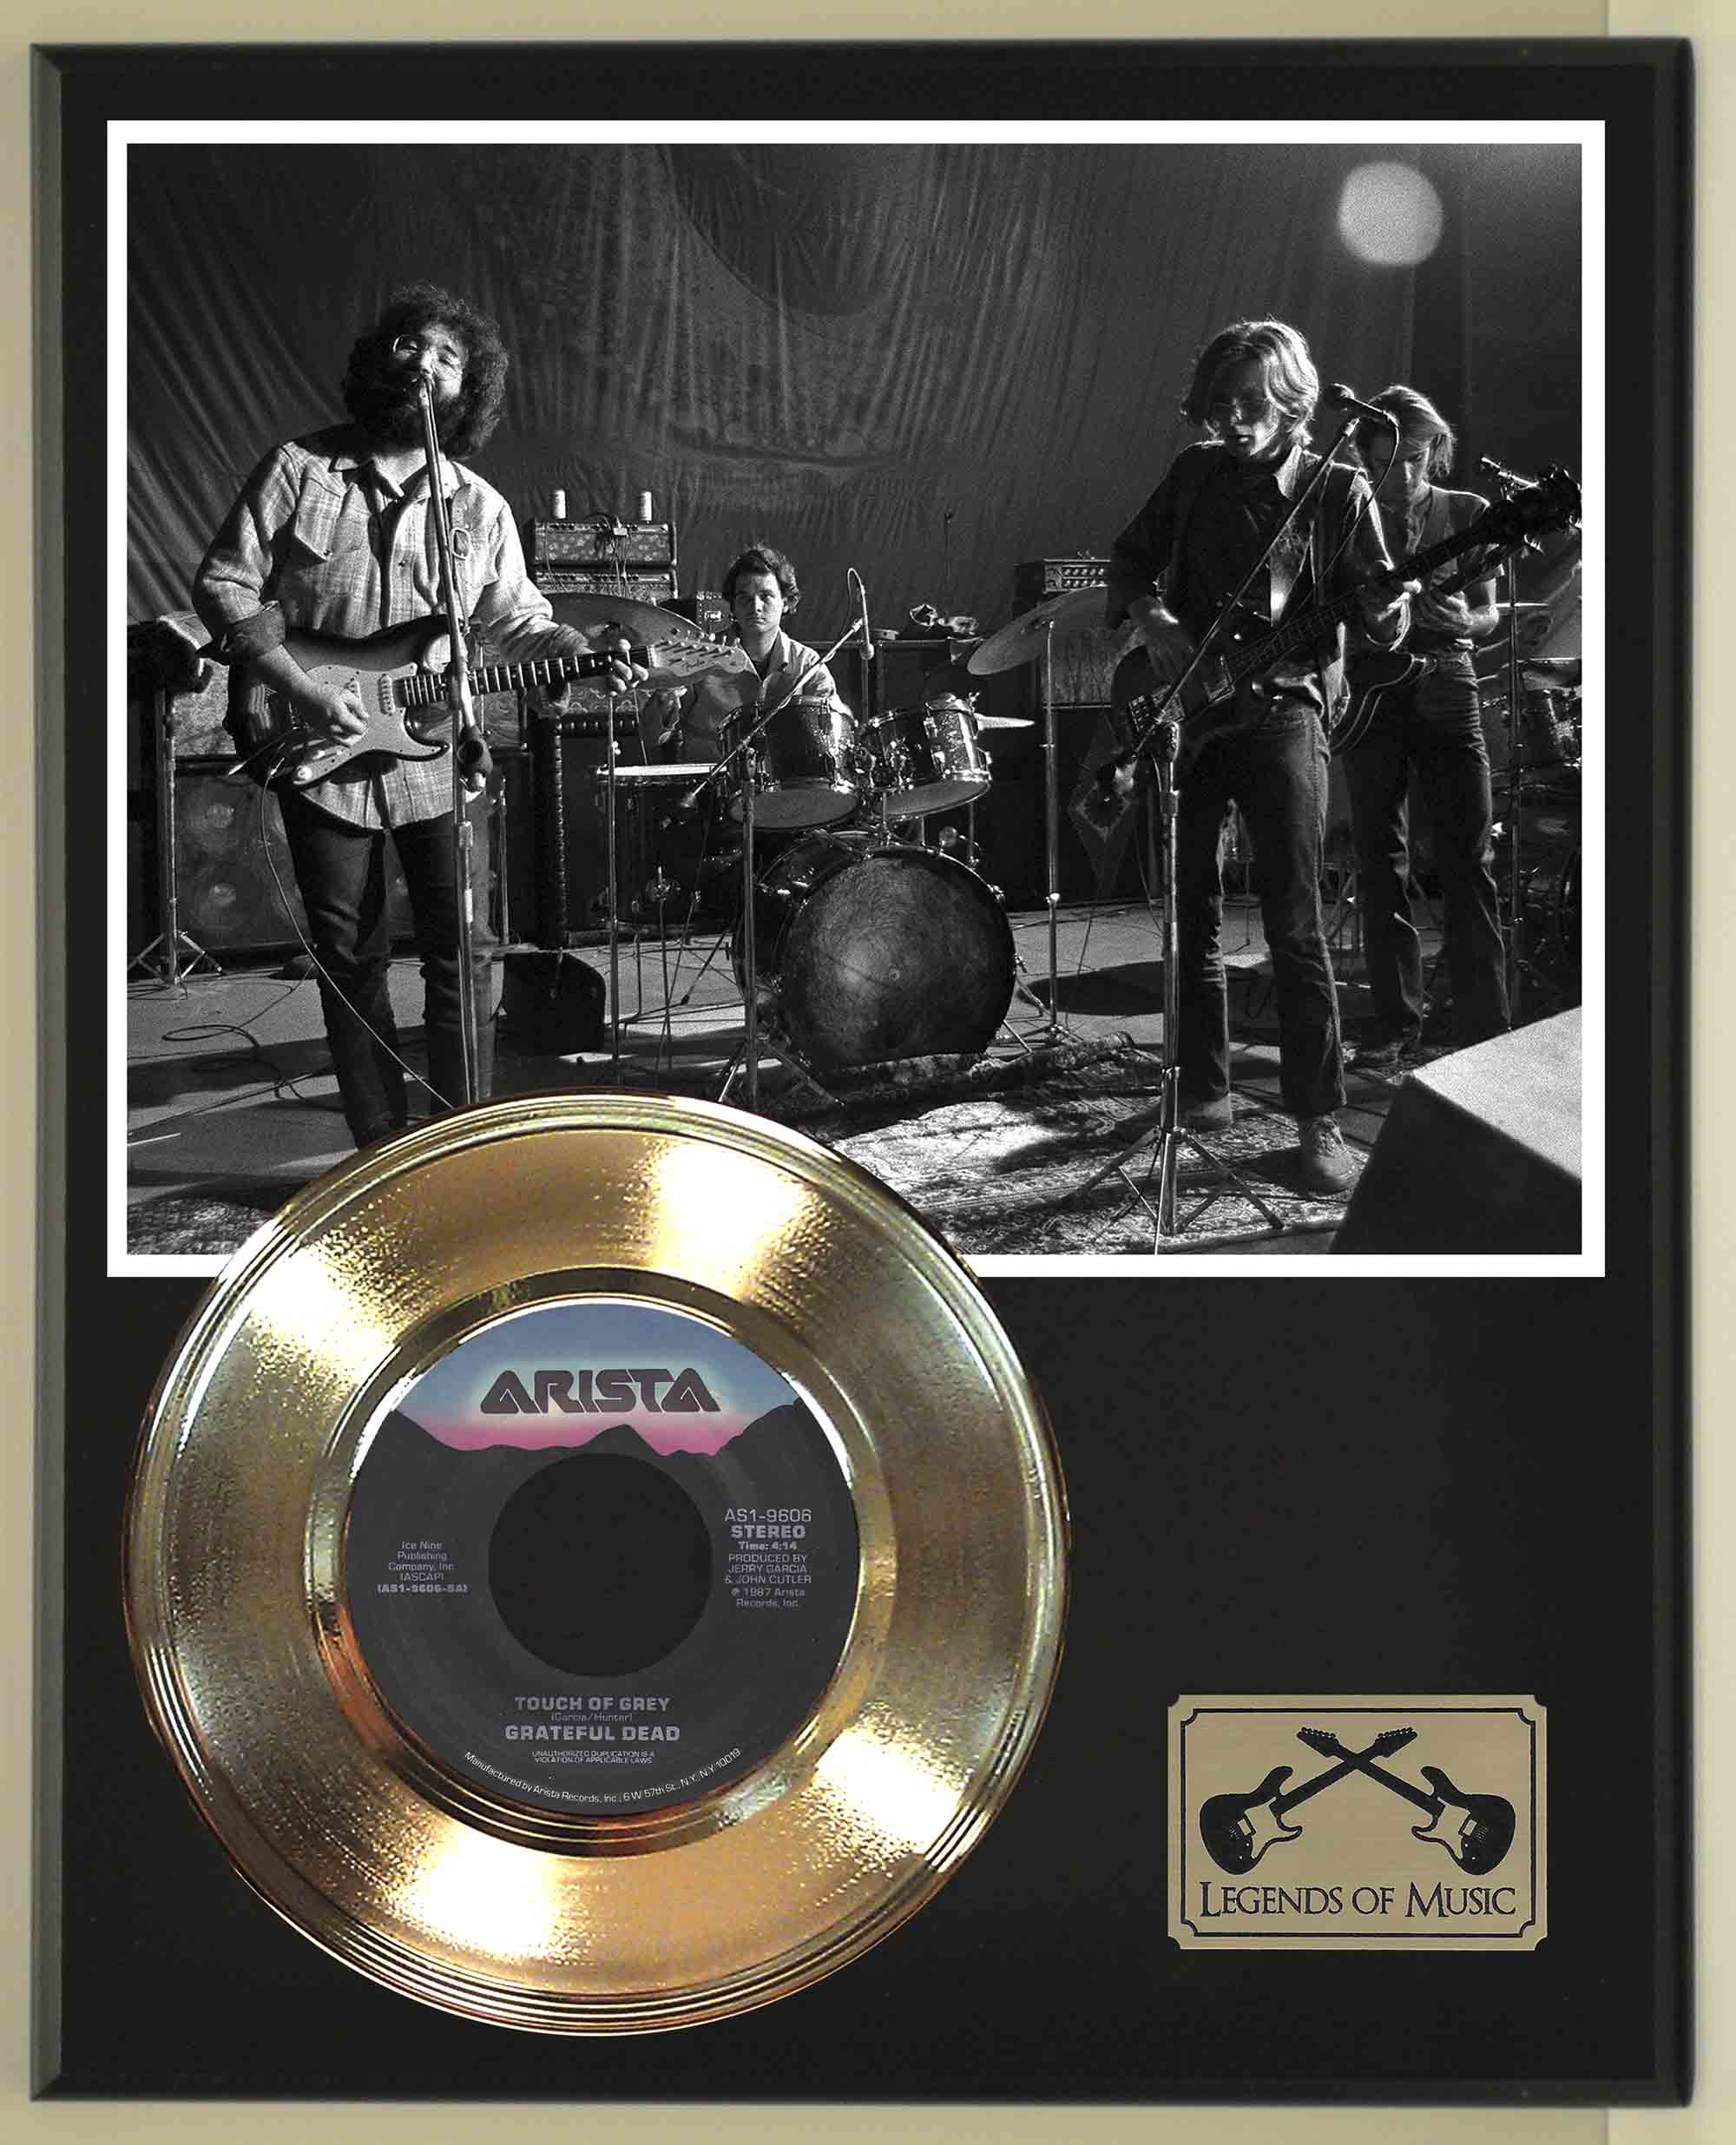 Grateful Dead - Touch Of Grey Gold 45 Record Ltd Edition Display Award  Quality